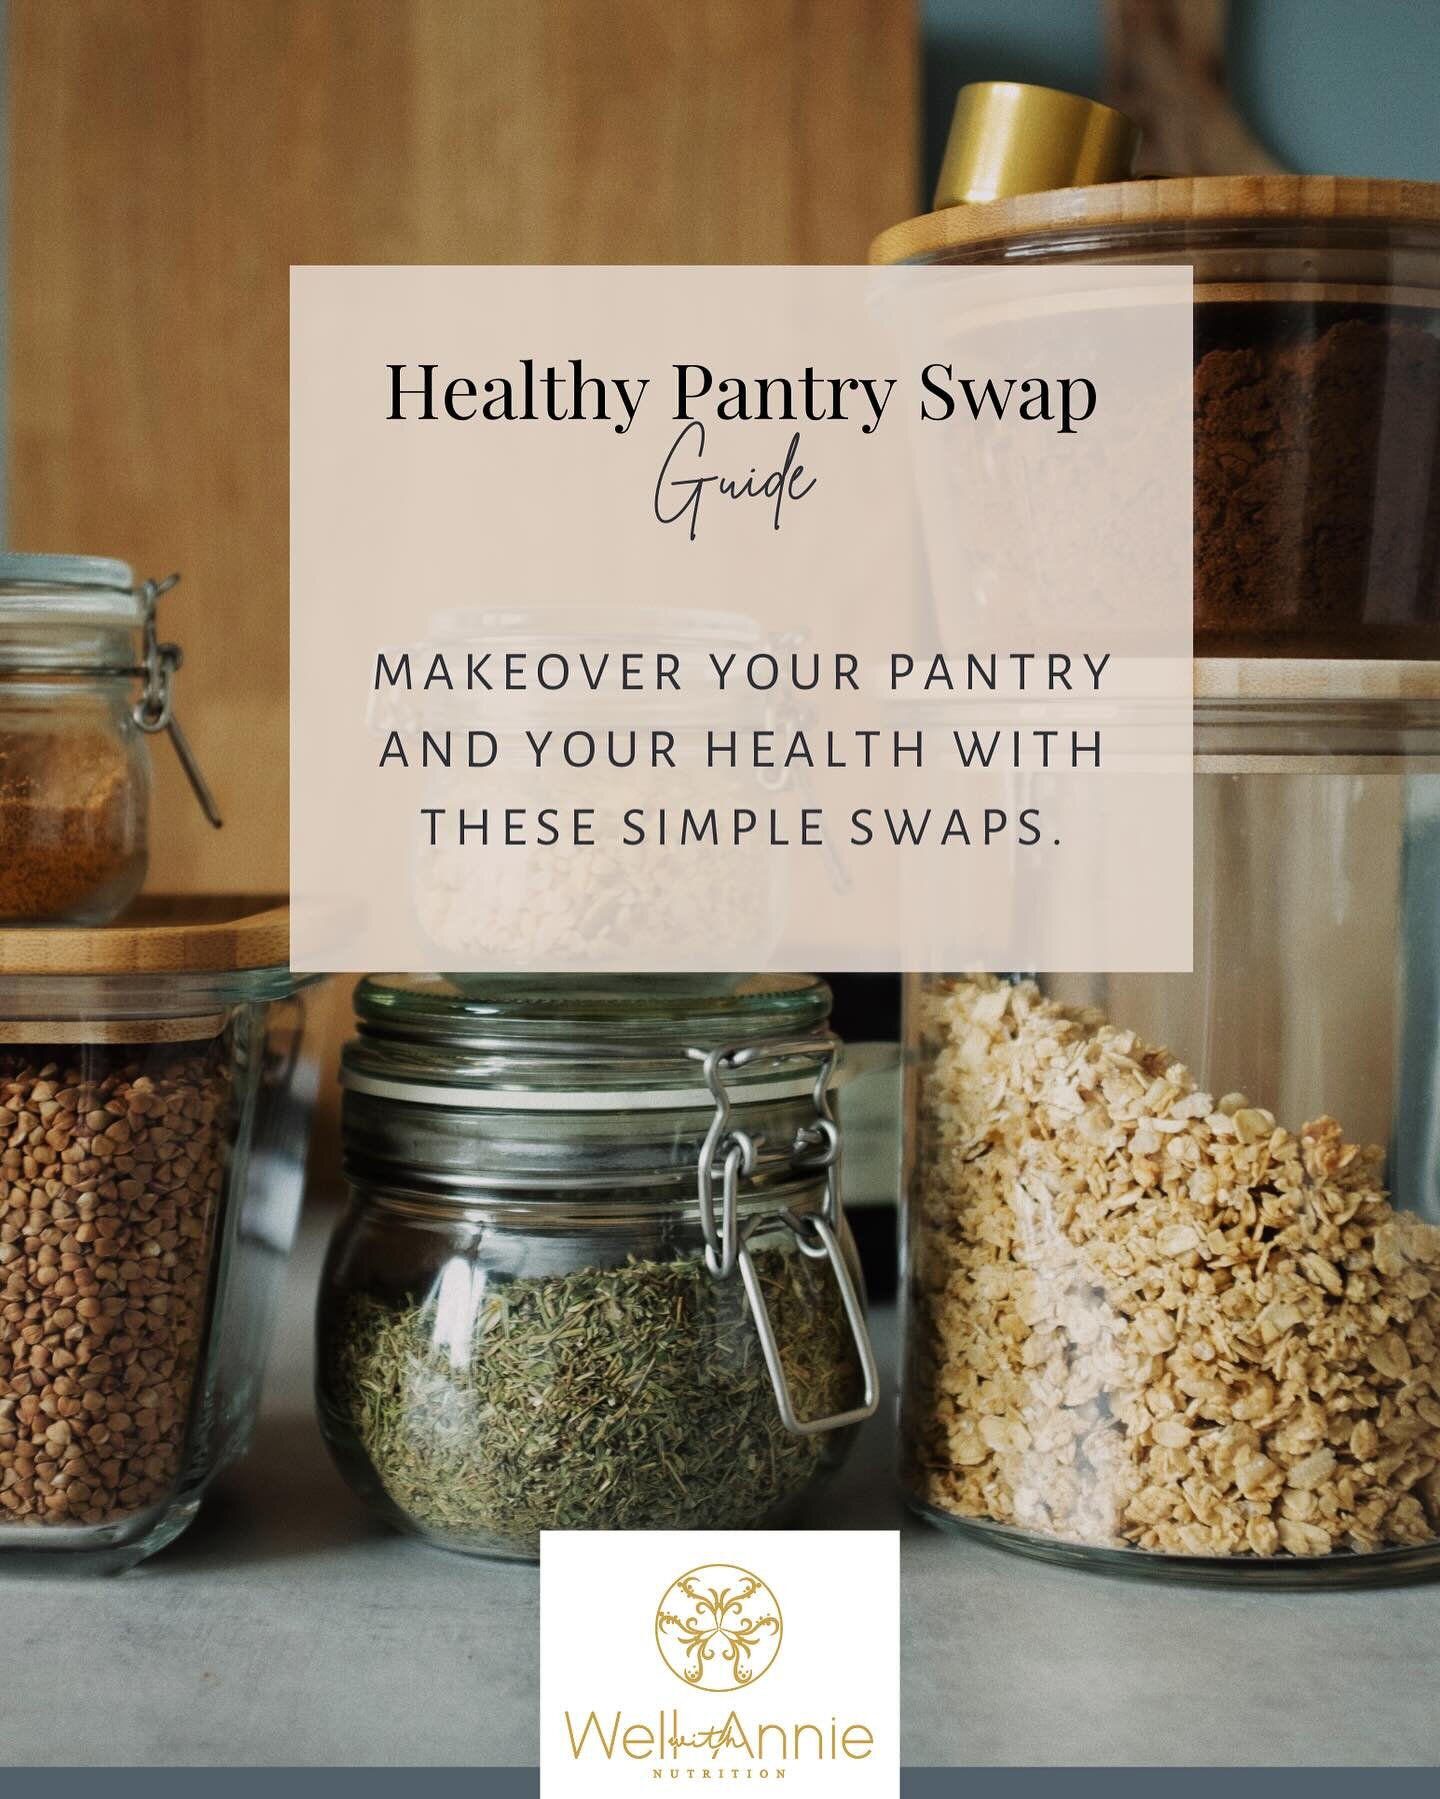 Easy Pantry Swaps for the New Year

start the new year off Strong by making small changes. One of the easiest ways to do this is by swapping out some of the items in your pantry. 

check out my guide for some suggestions 🍏🥬🥑🫐

#HealthyPantryChoic